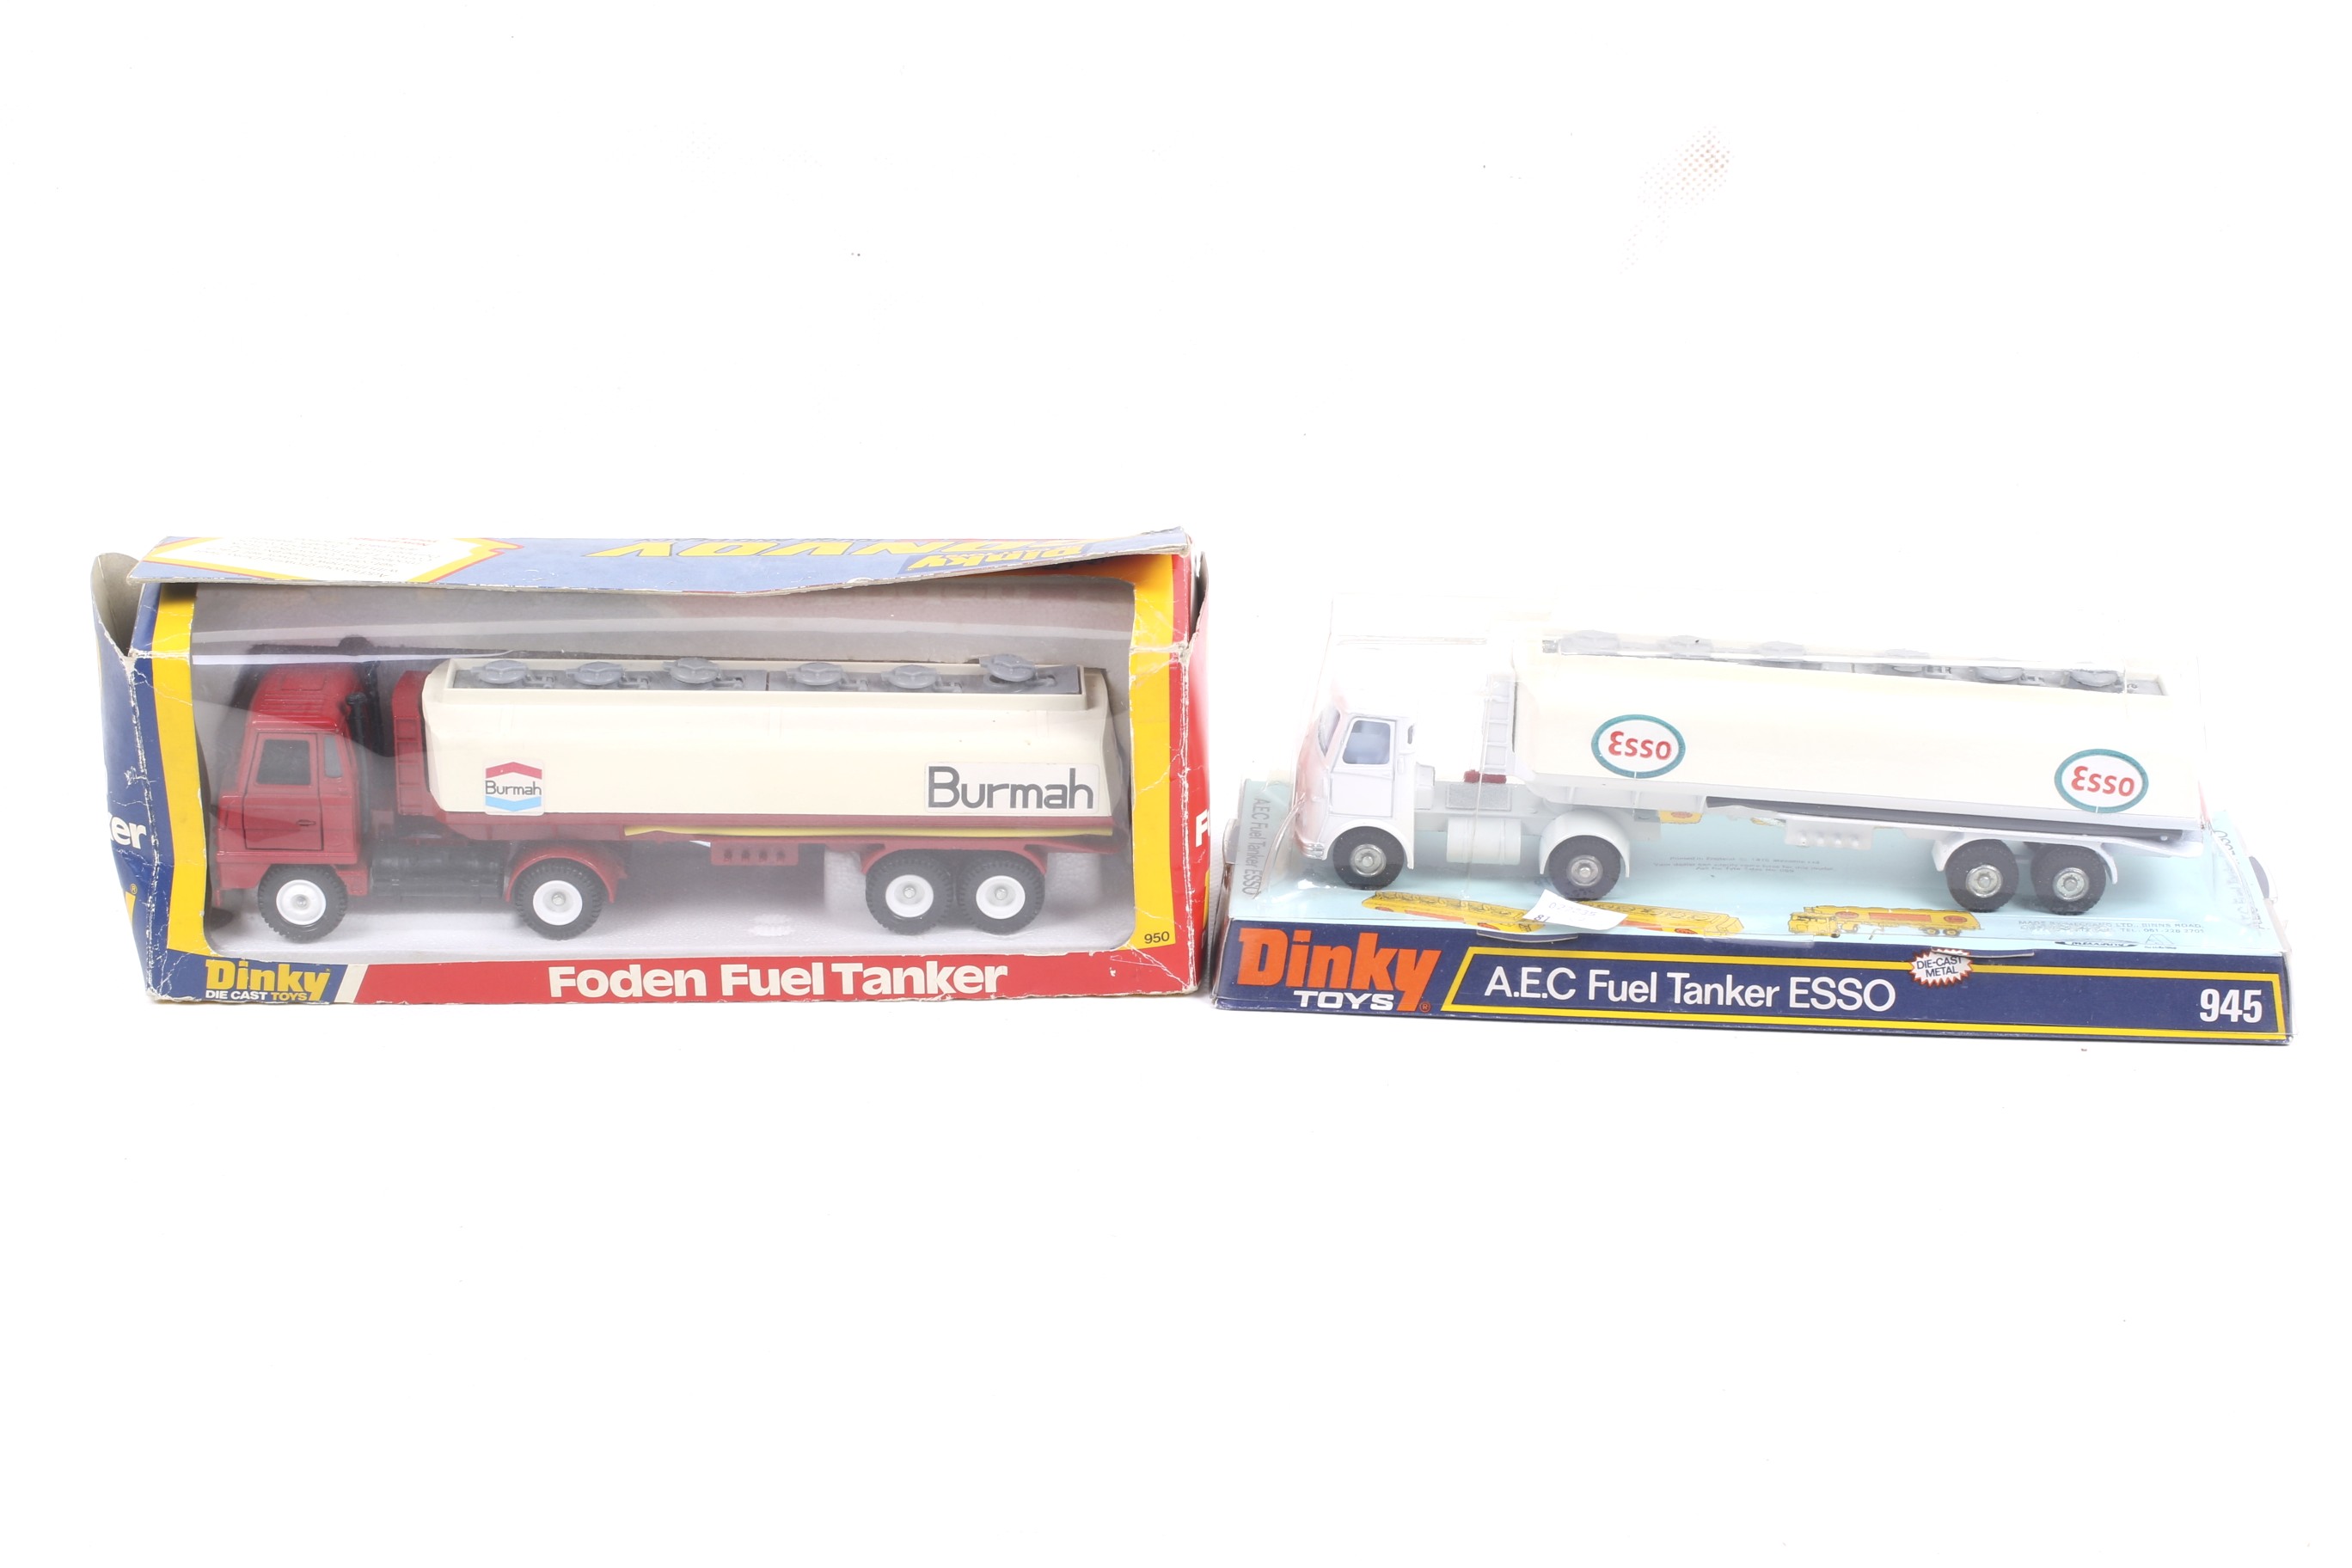 Two Dinky diecast fuel tankers. One Foden fuel tanker no. 950 and one AEC Esso tanker no.